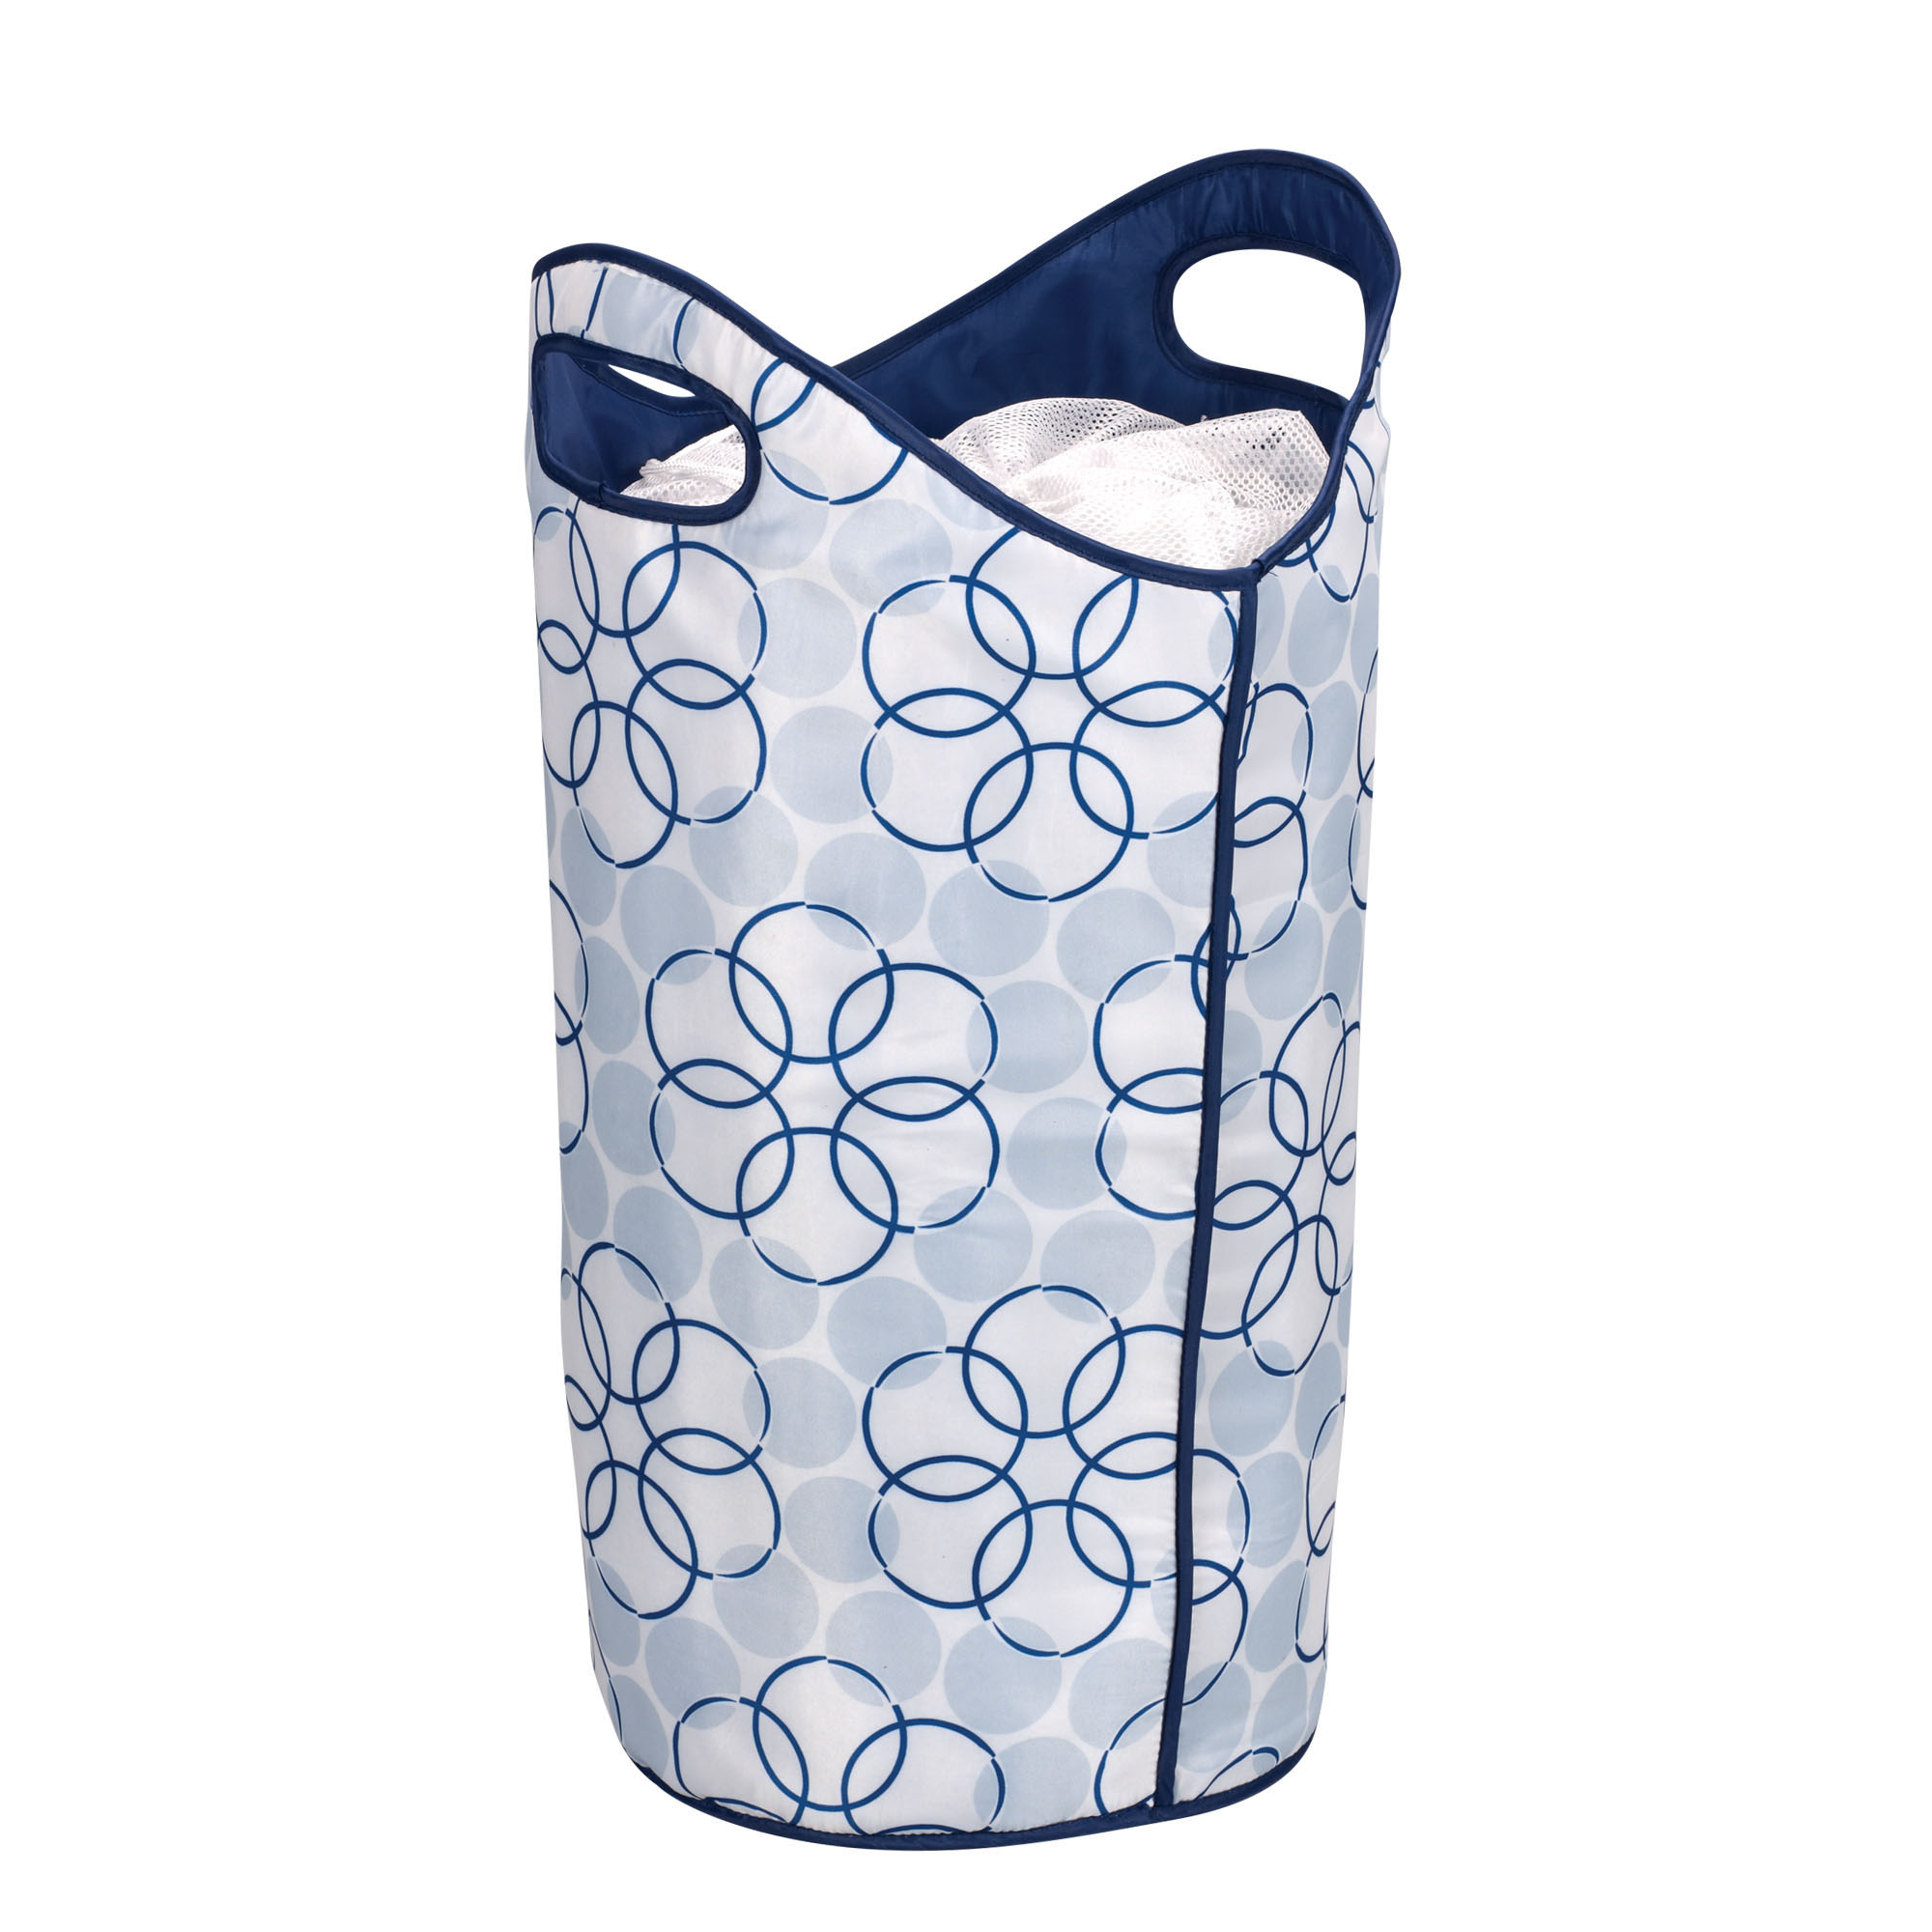 Household Essentials Patterned Laundry Hamper Tote - image 1 of 4